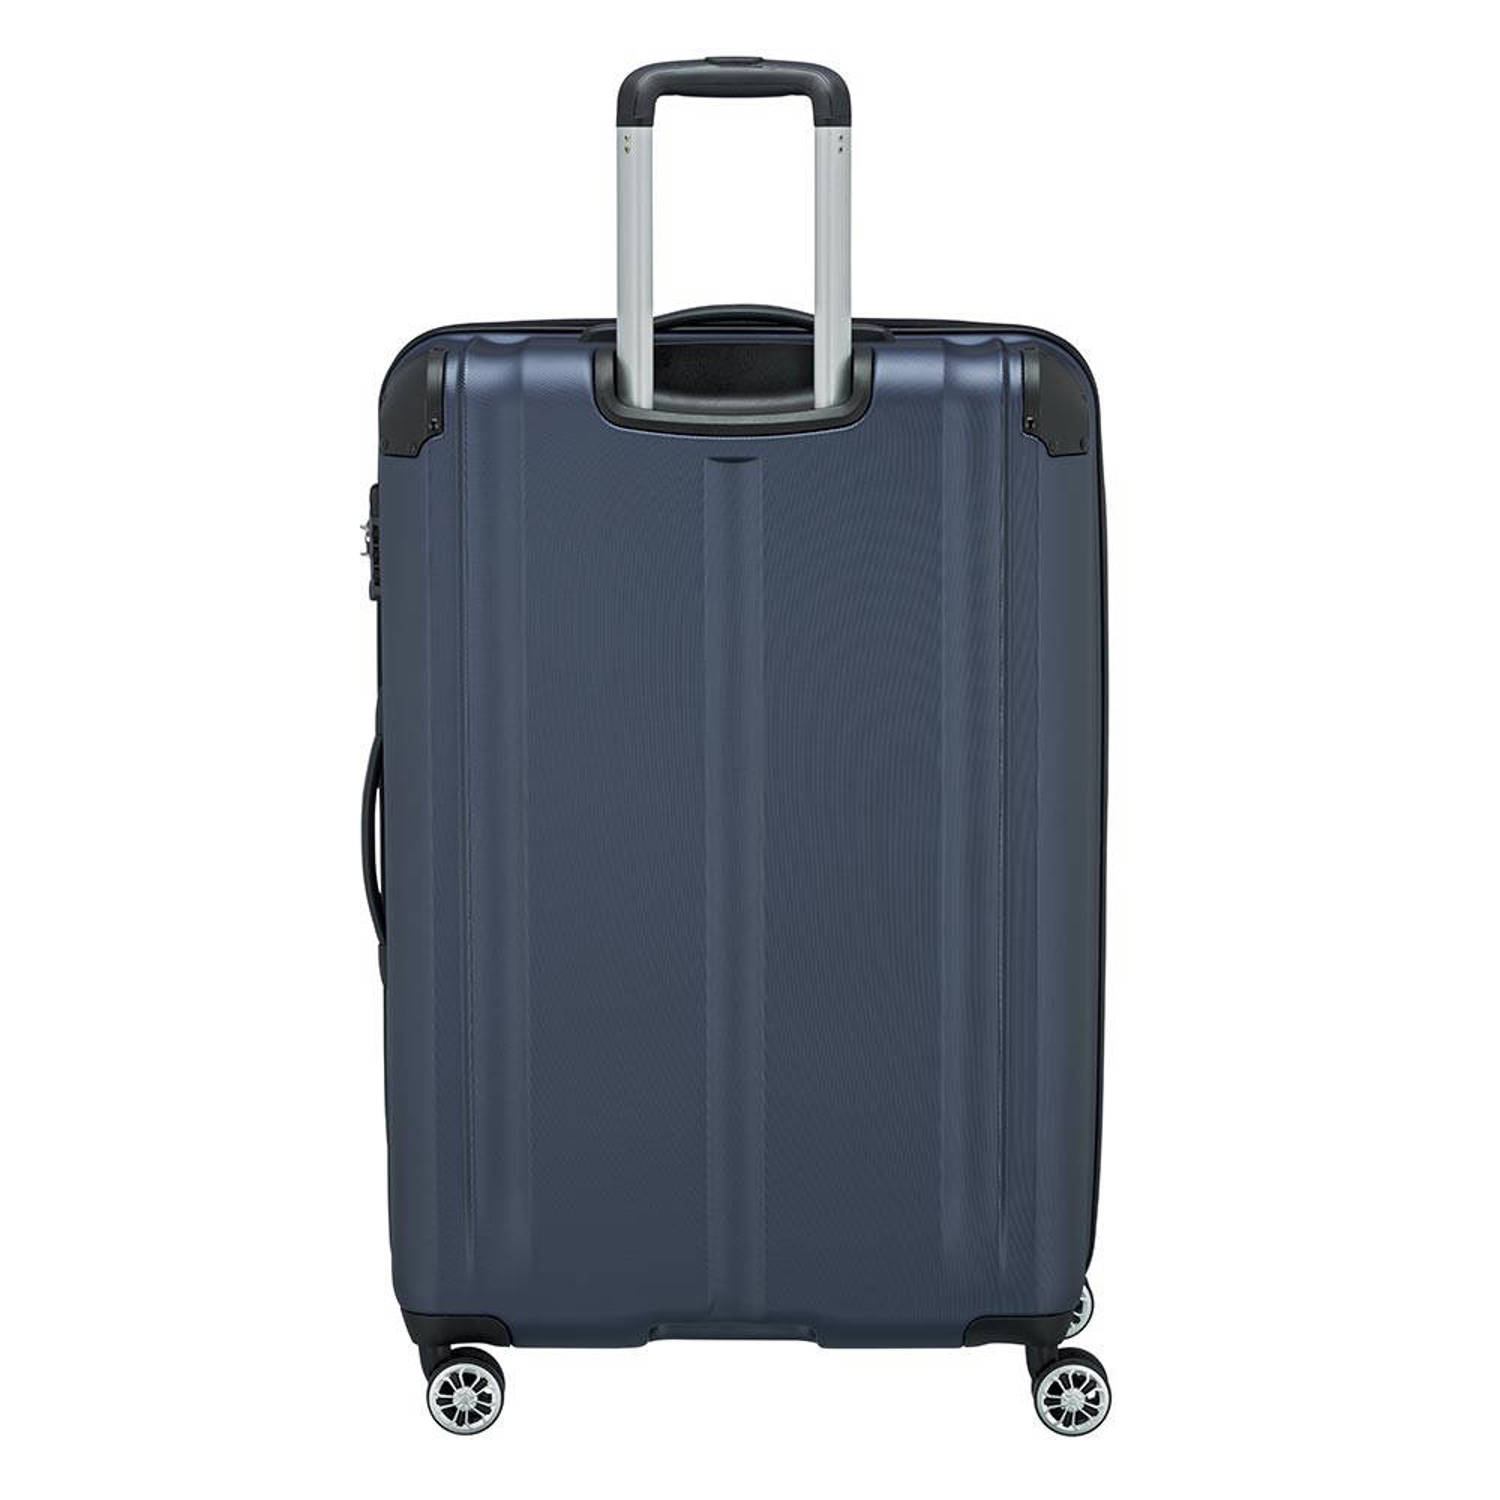 Travelite trolley City 77 cm. Expandable donkerblauw